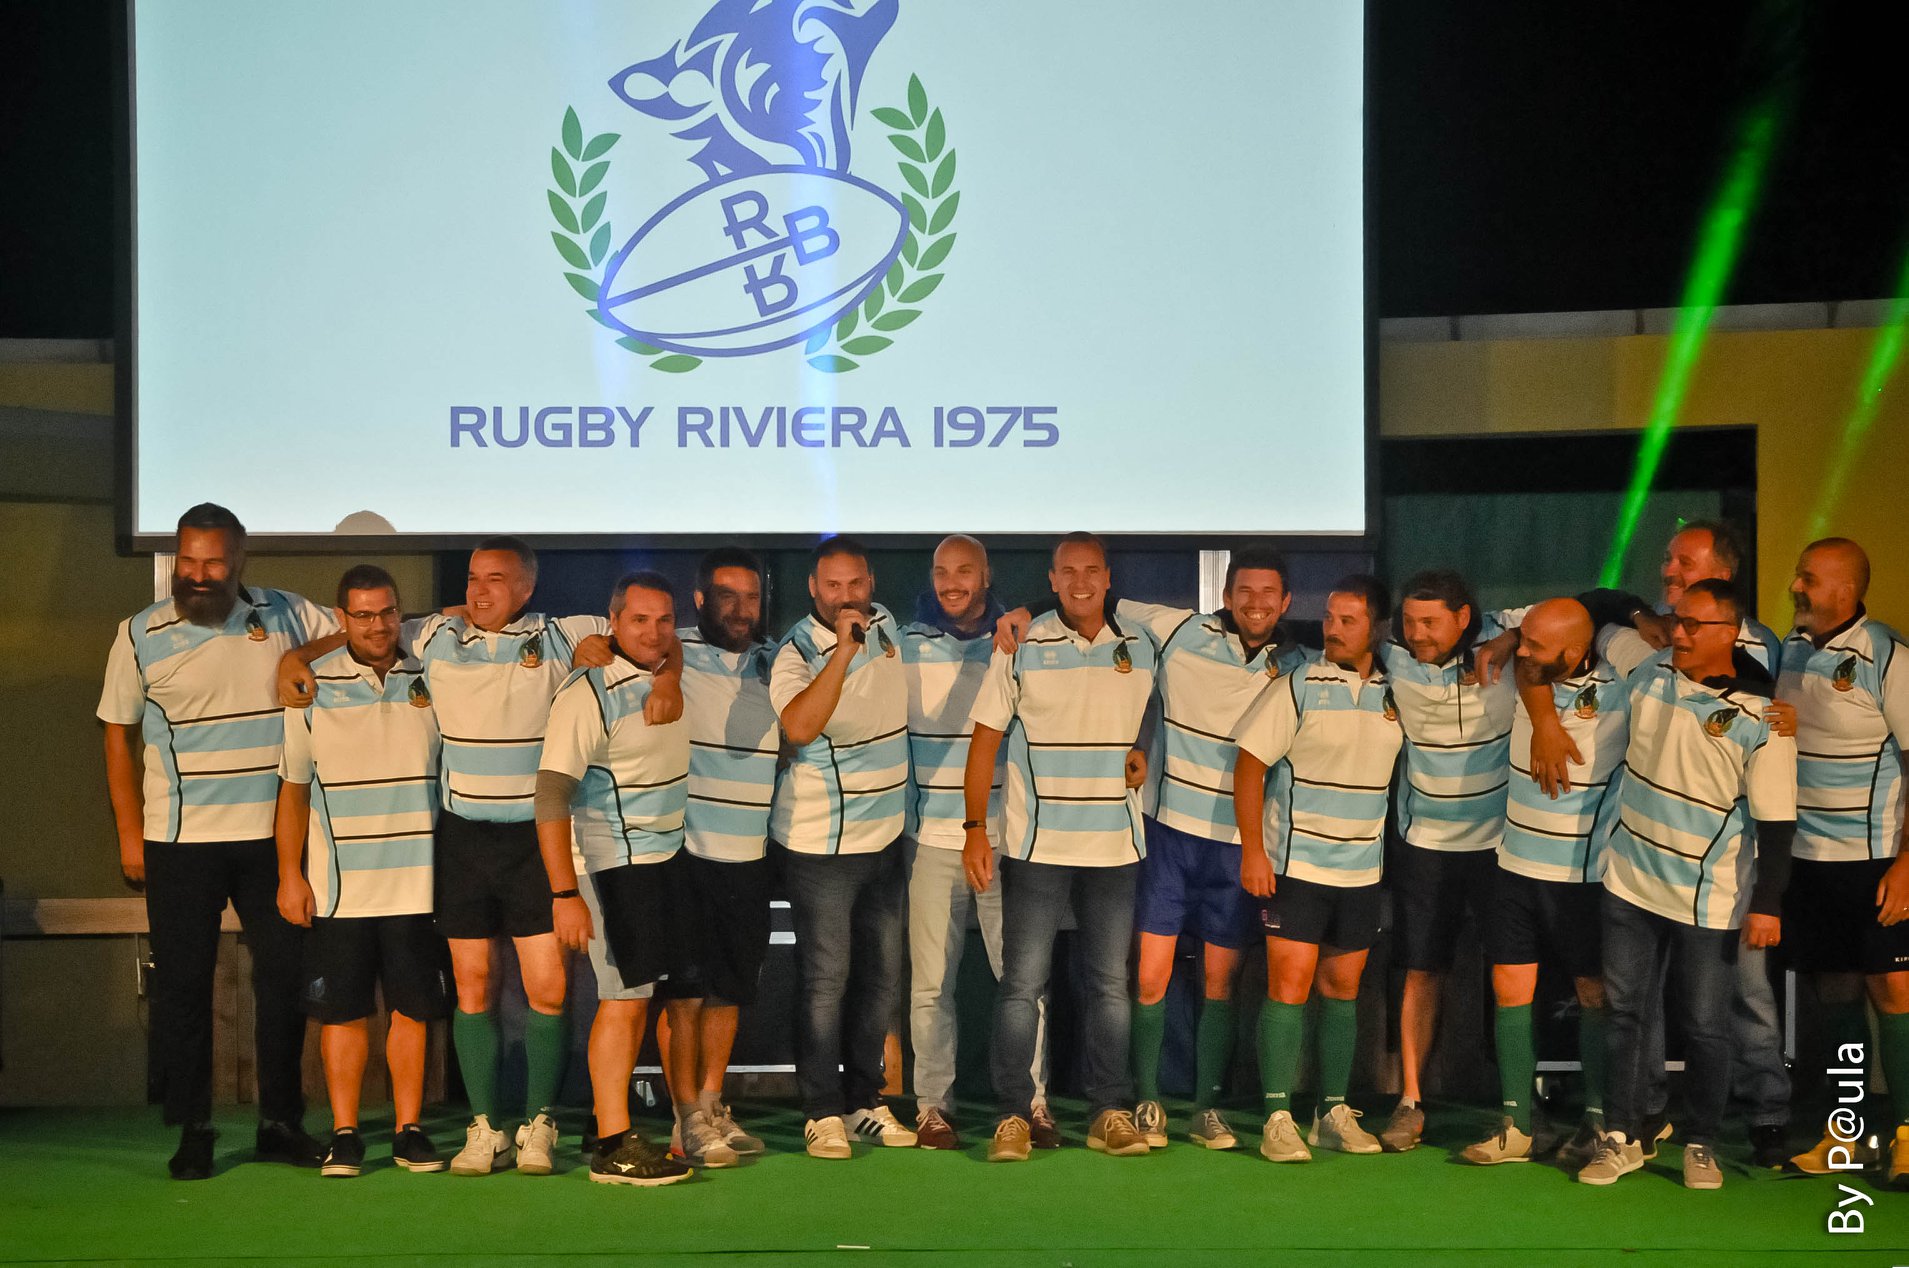 Rugby Riviera 1975 - OLD